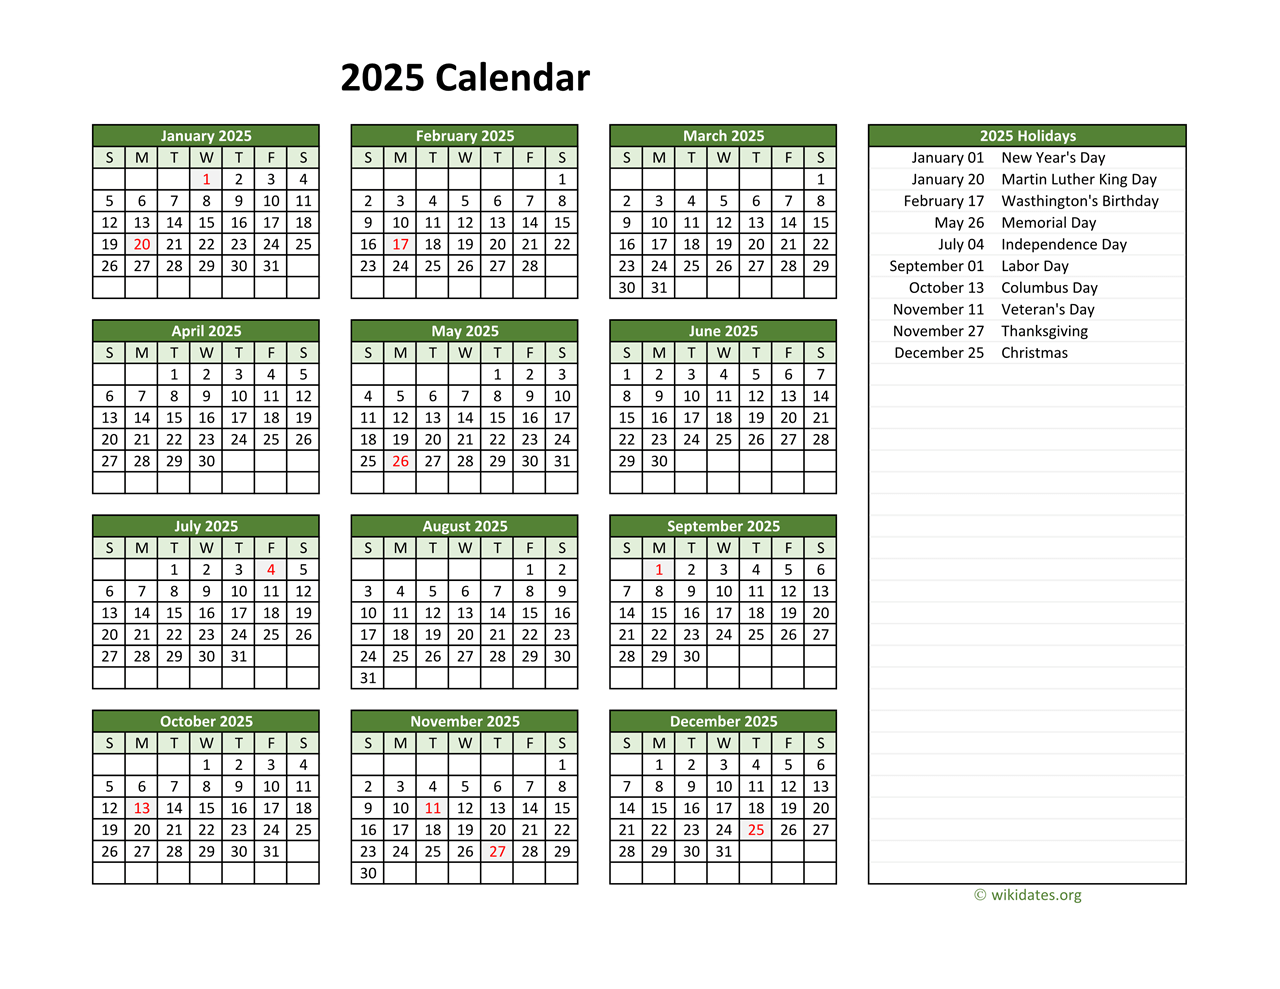 Printable 2025 Calendar With Federal Holidays WikiDates